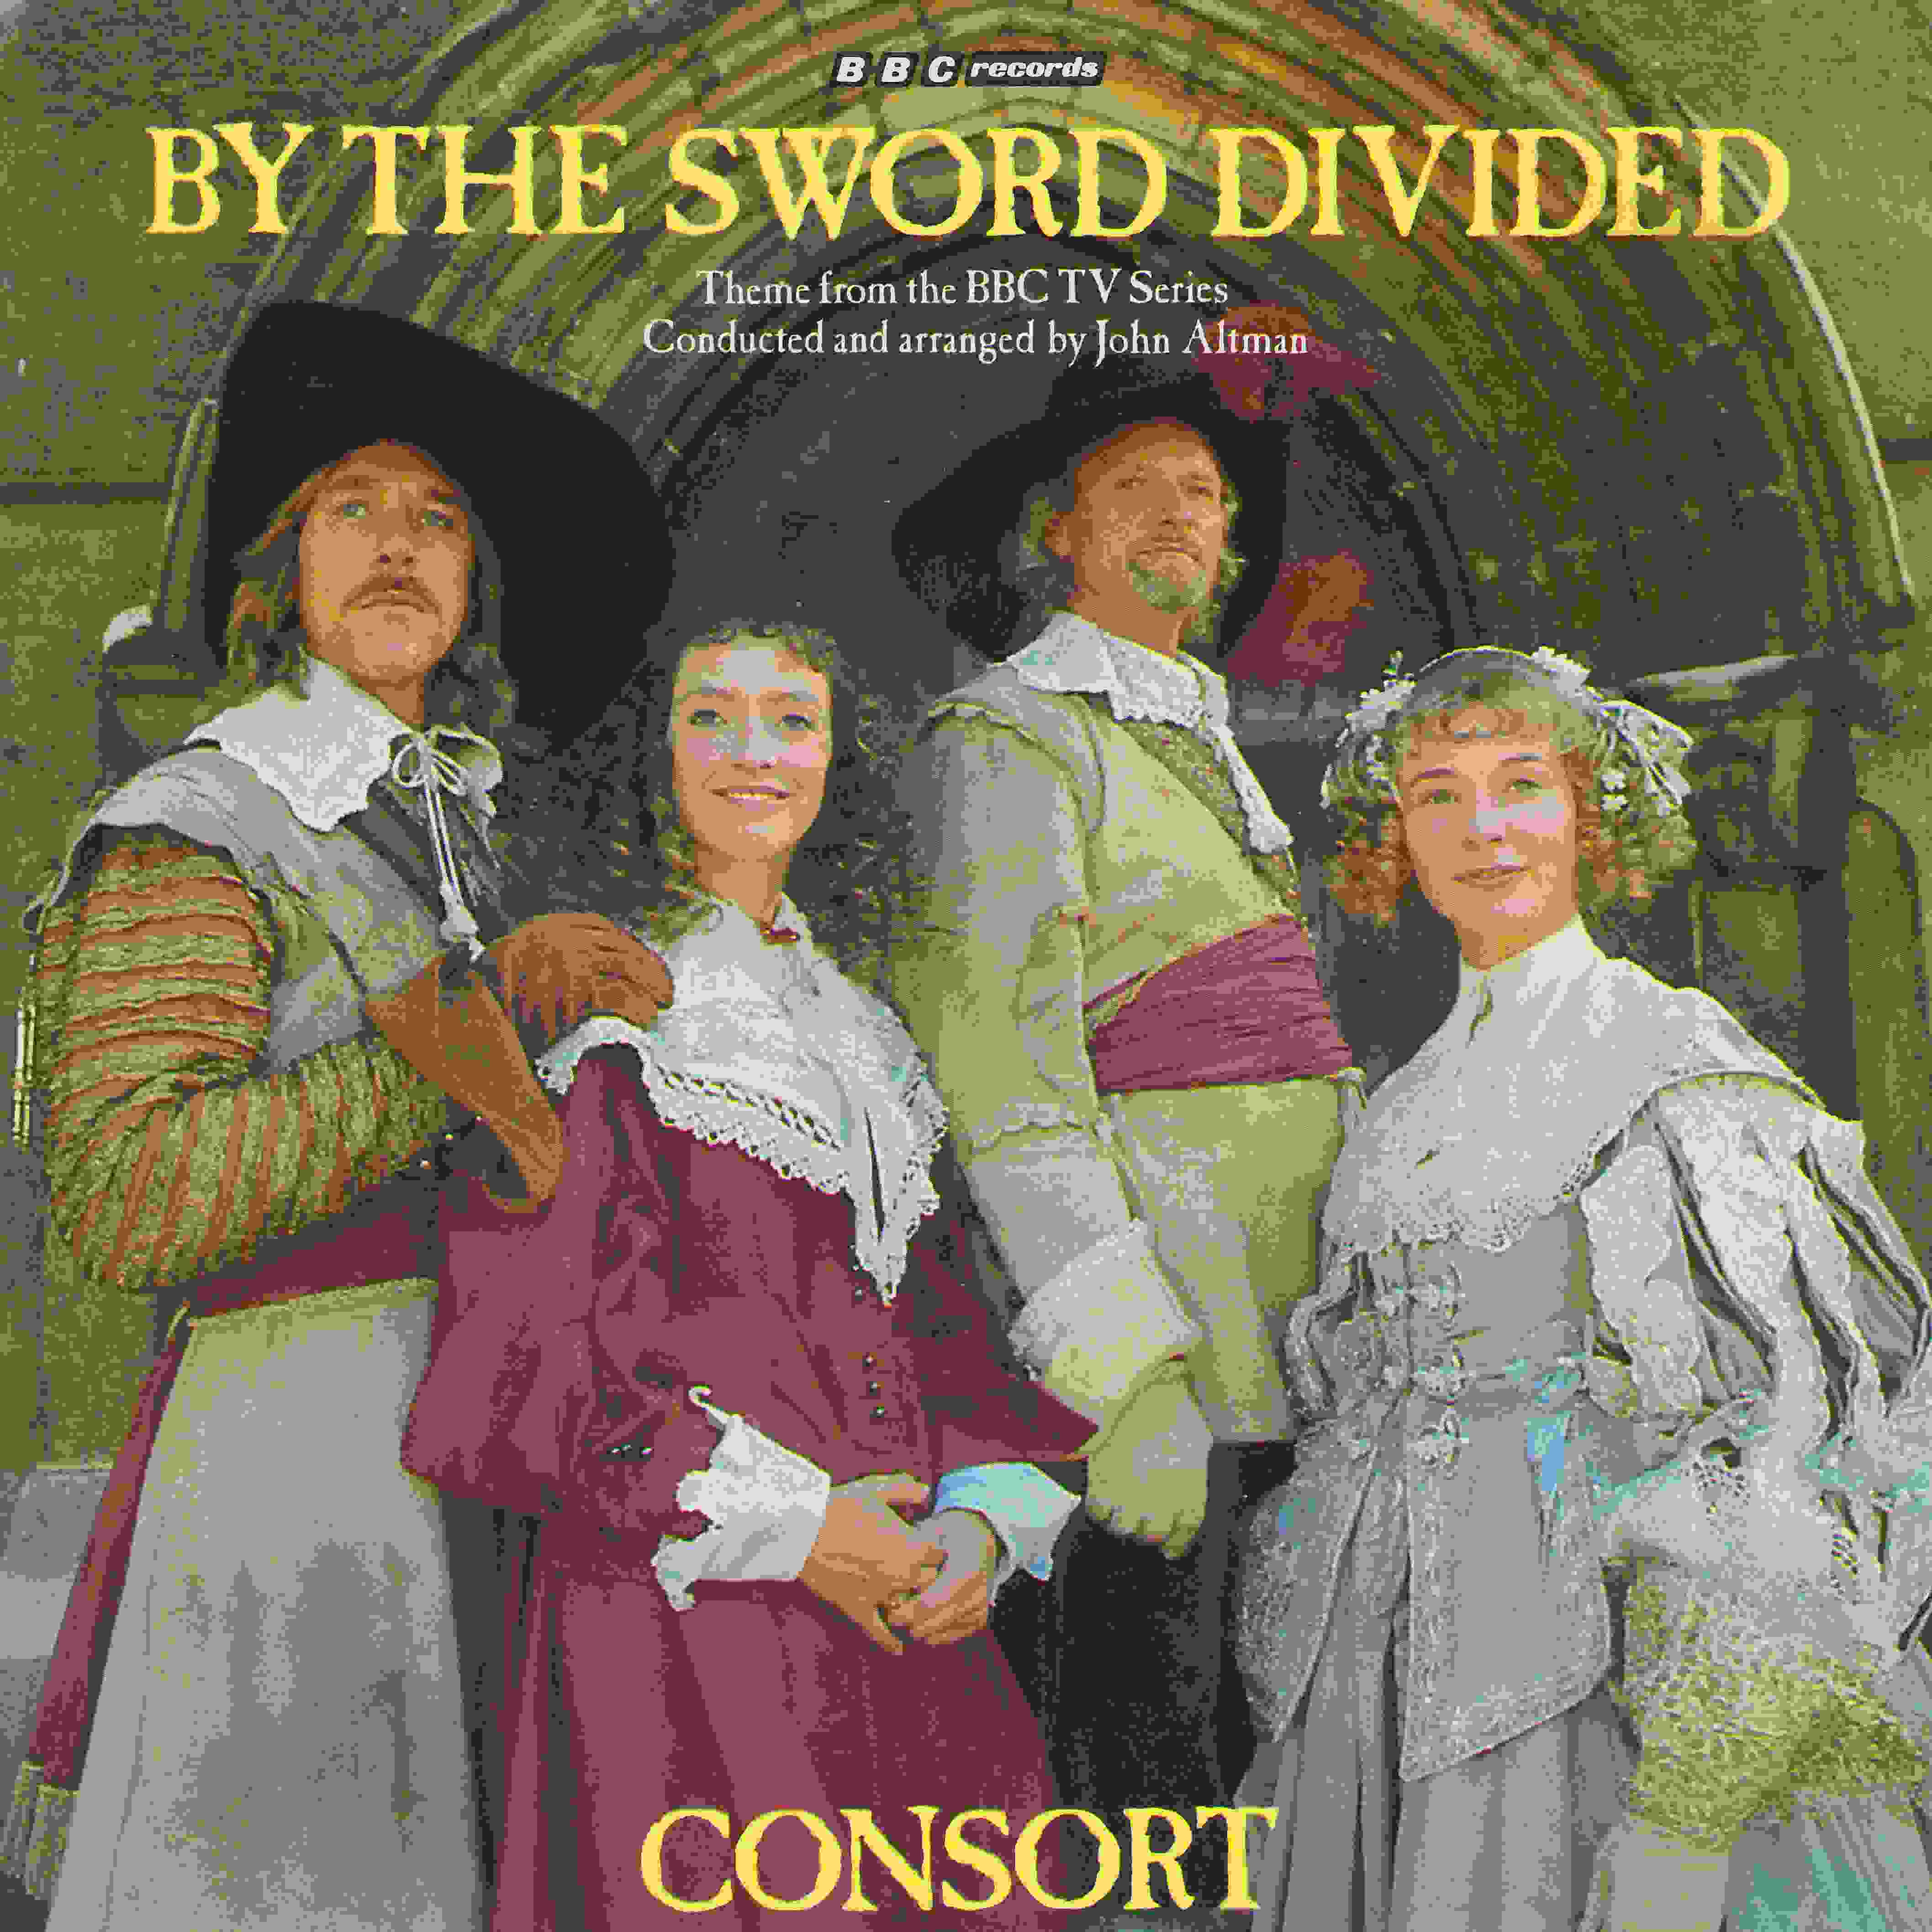 Picture of RESL 137 By the sword divided by artist Ken Howard / Alan Blaikley / Consort from the BBC singles - Records and Tapes library